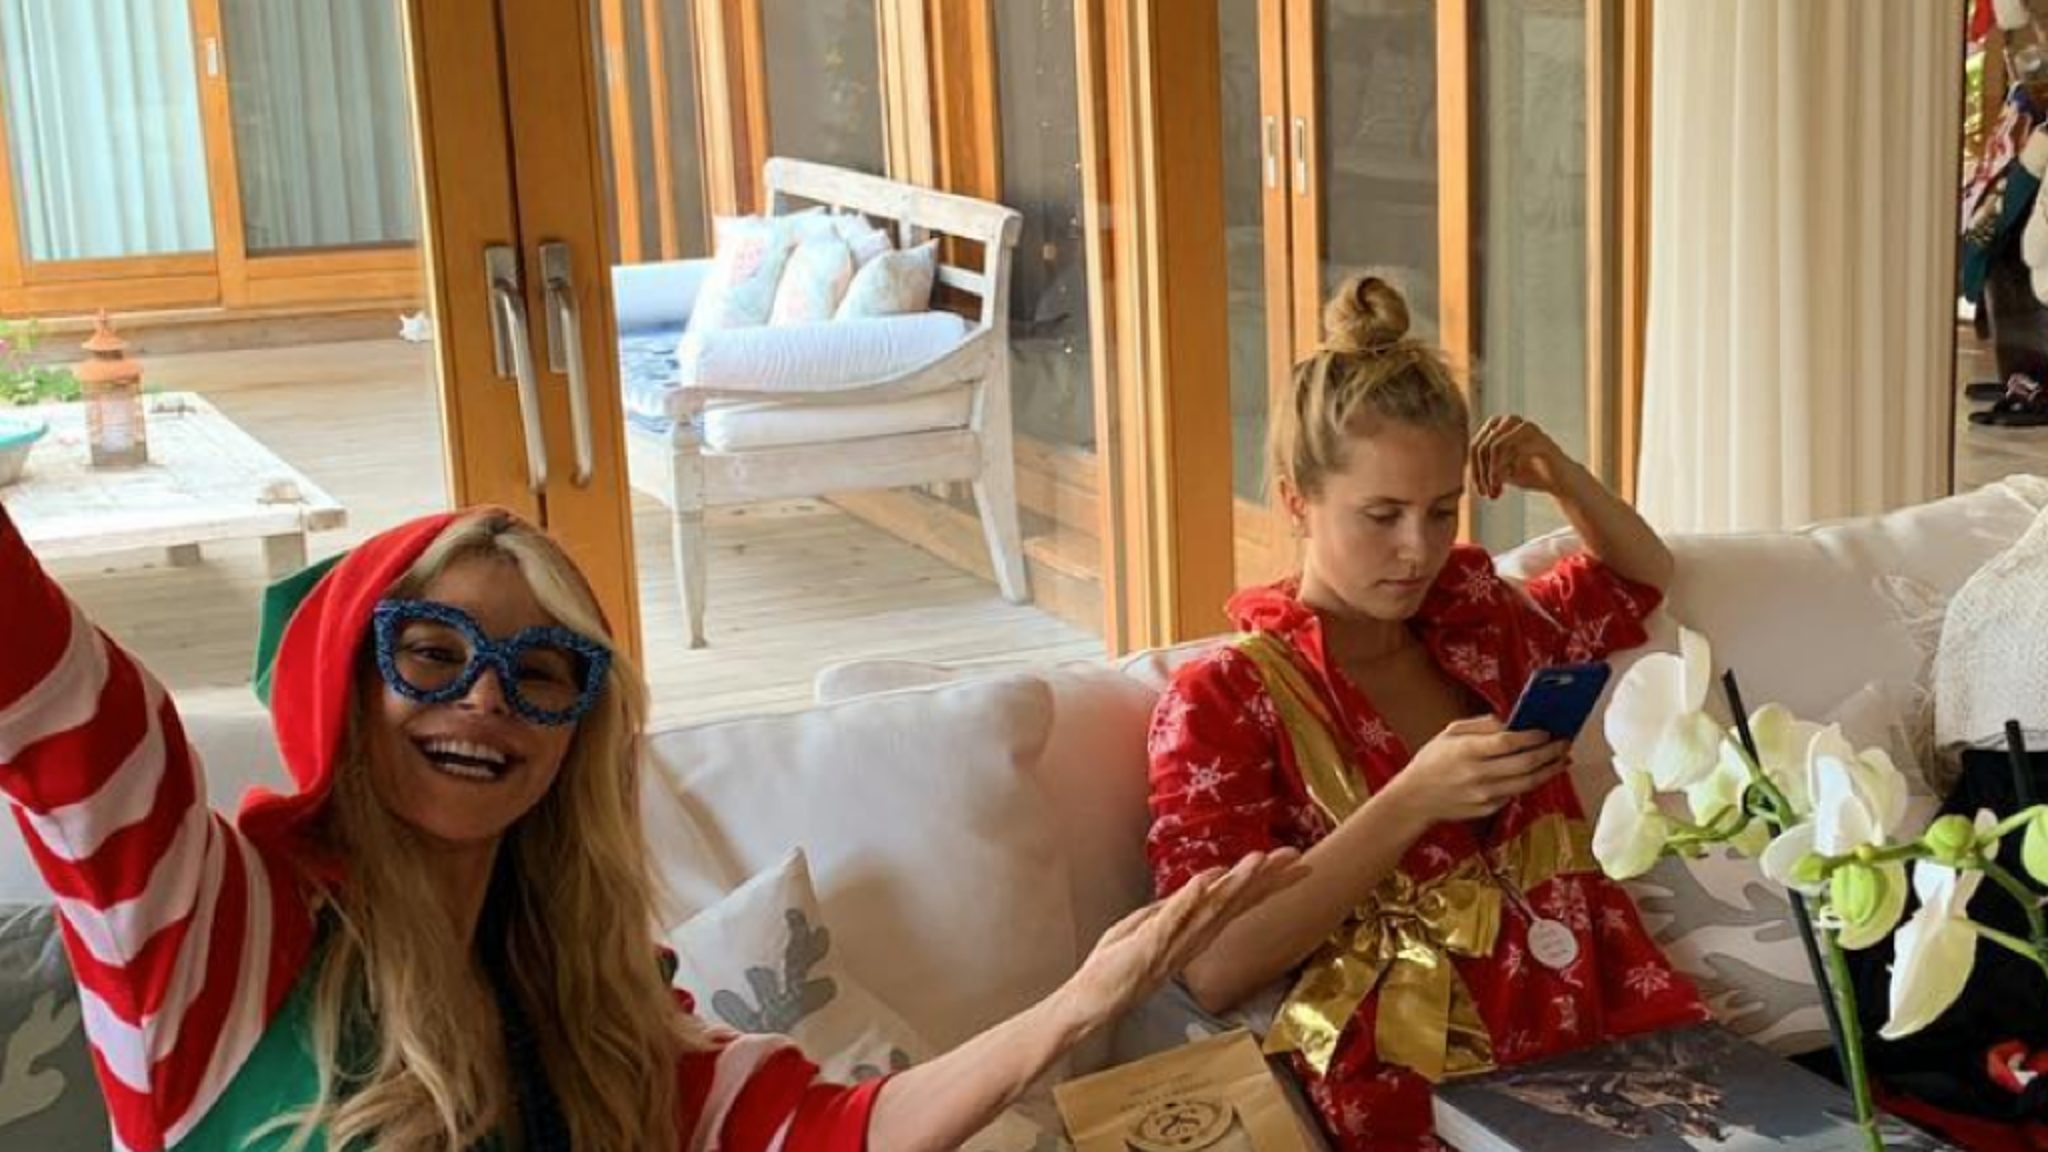 Christie and Sailor Brinkley's Family Vacation Photos